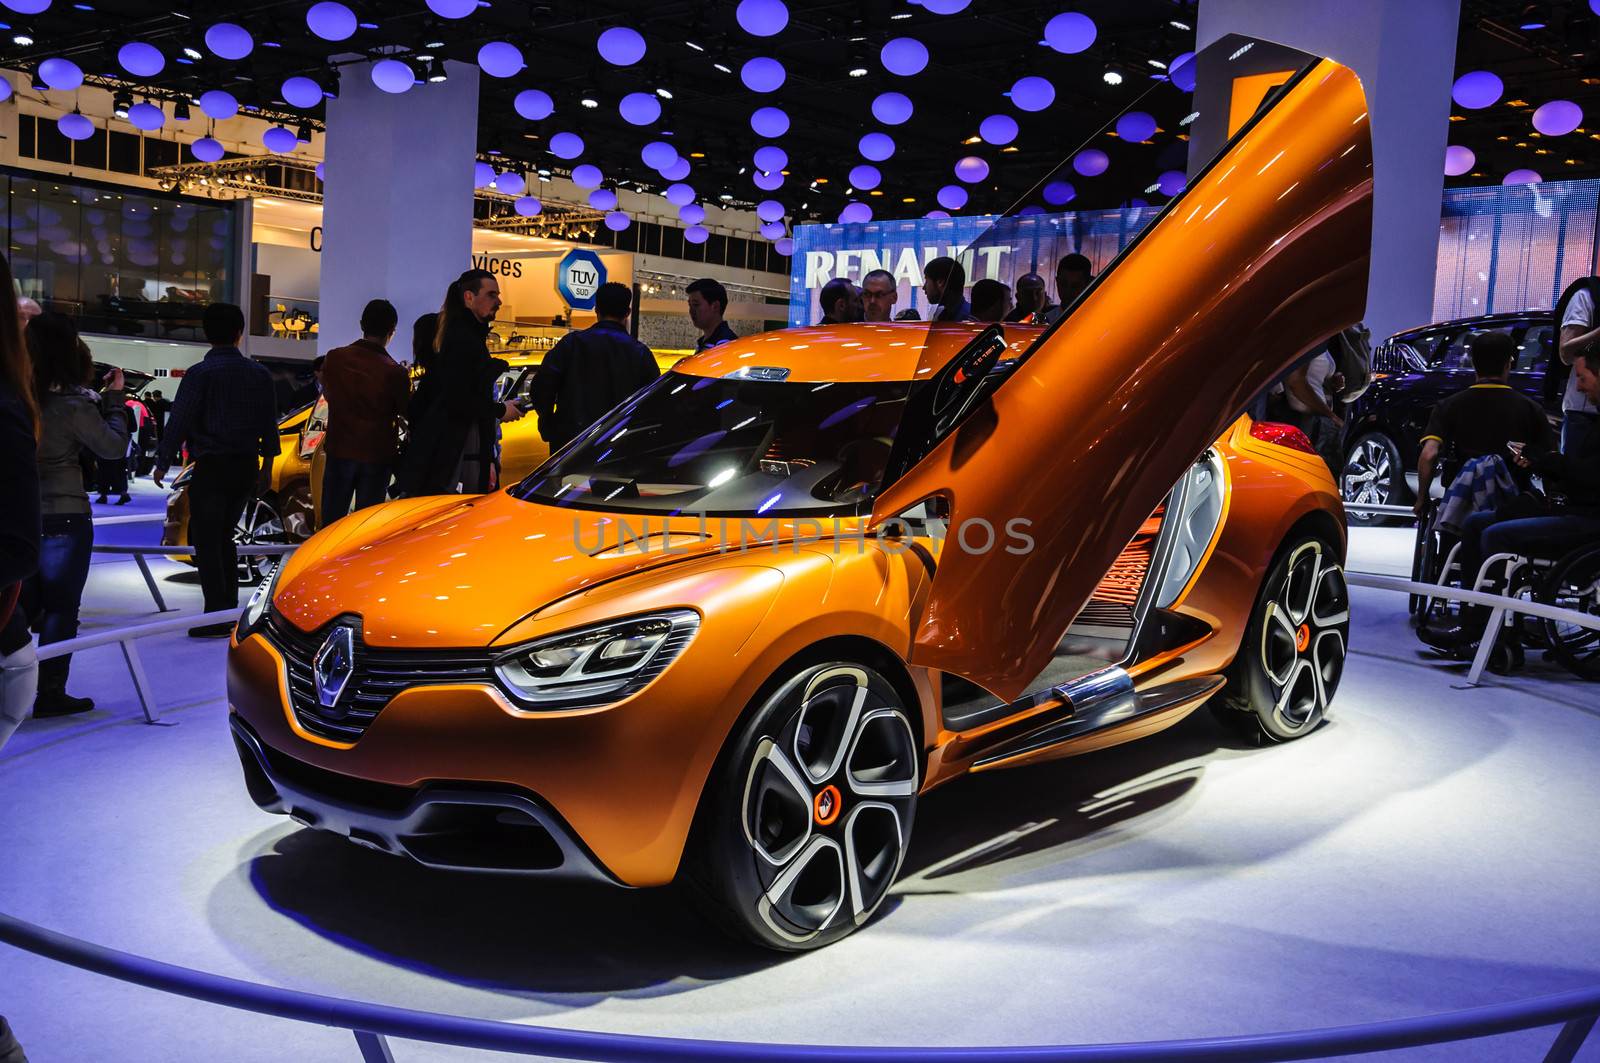 FRANKFURT - SEPT 21: RENAULT CAPTUR CONCEPT CAR presented as world premiere at the 65th IAA (Internationale Automobil Ausstellung) on September 21, 2013 in Frankfurt, Germany